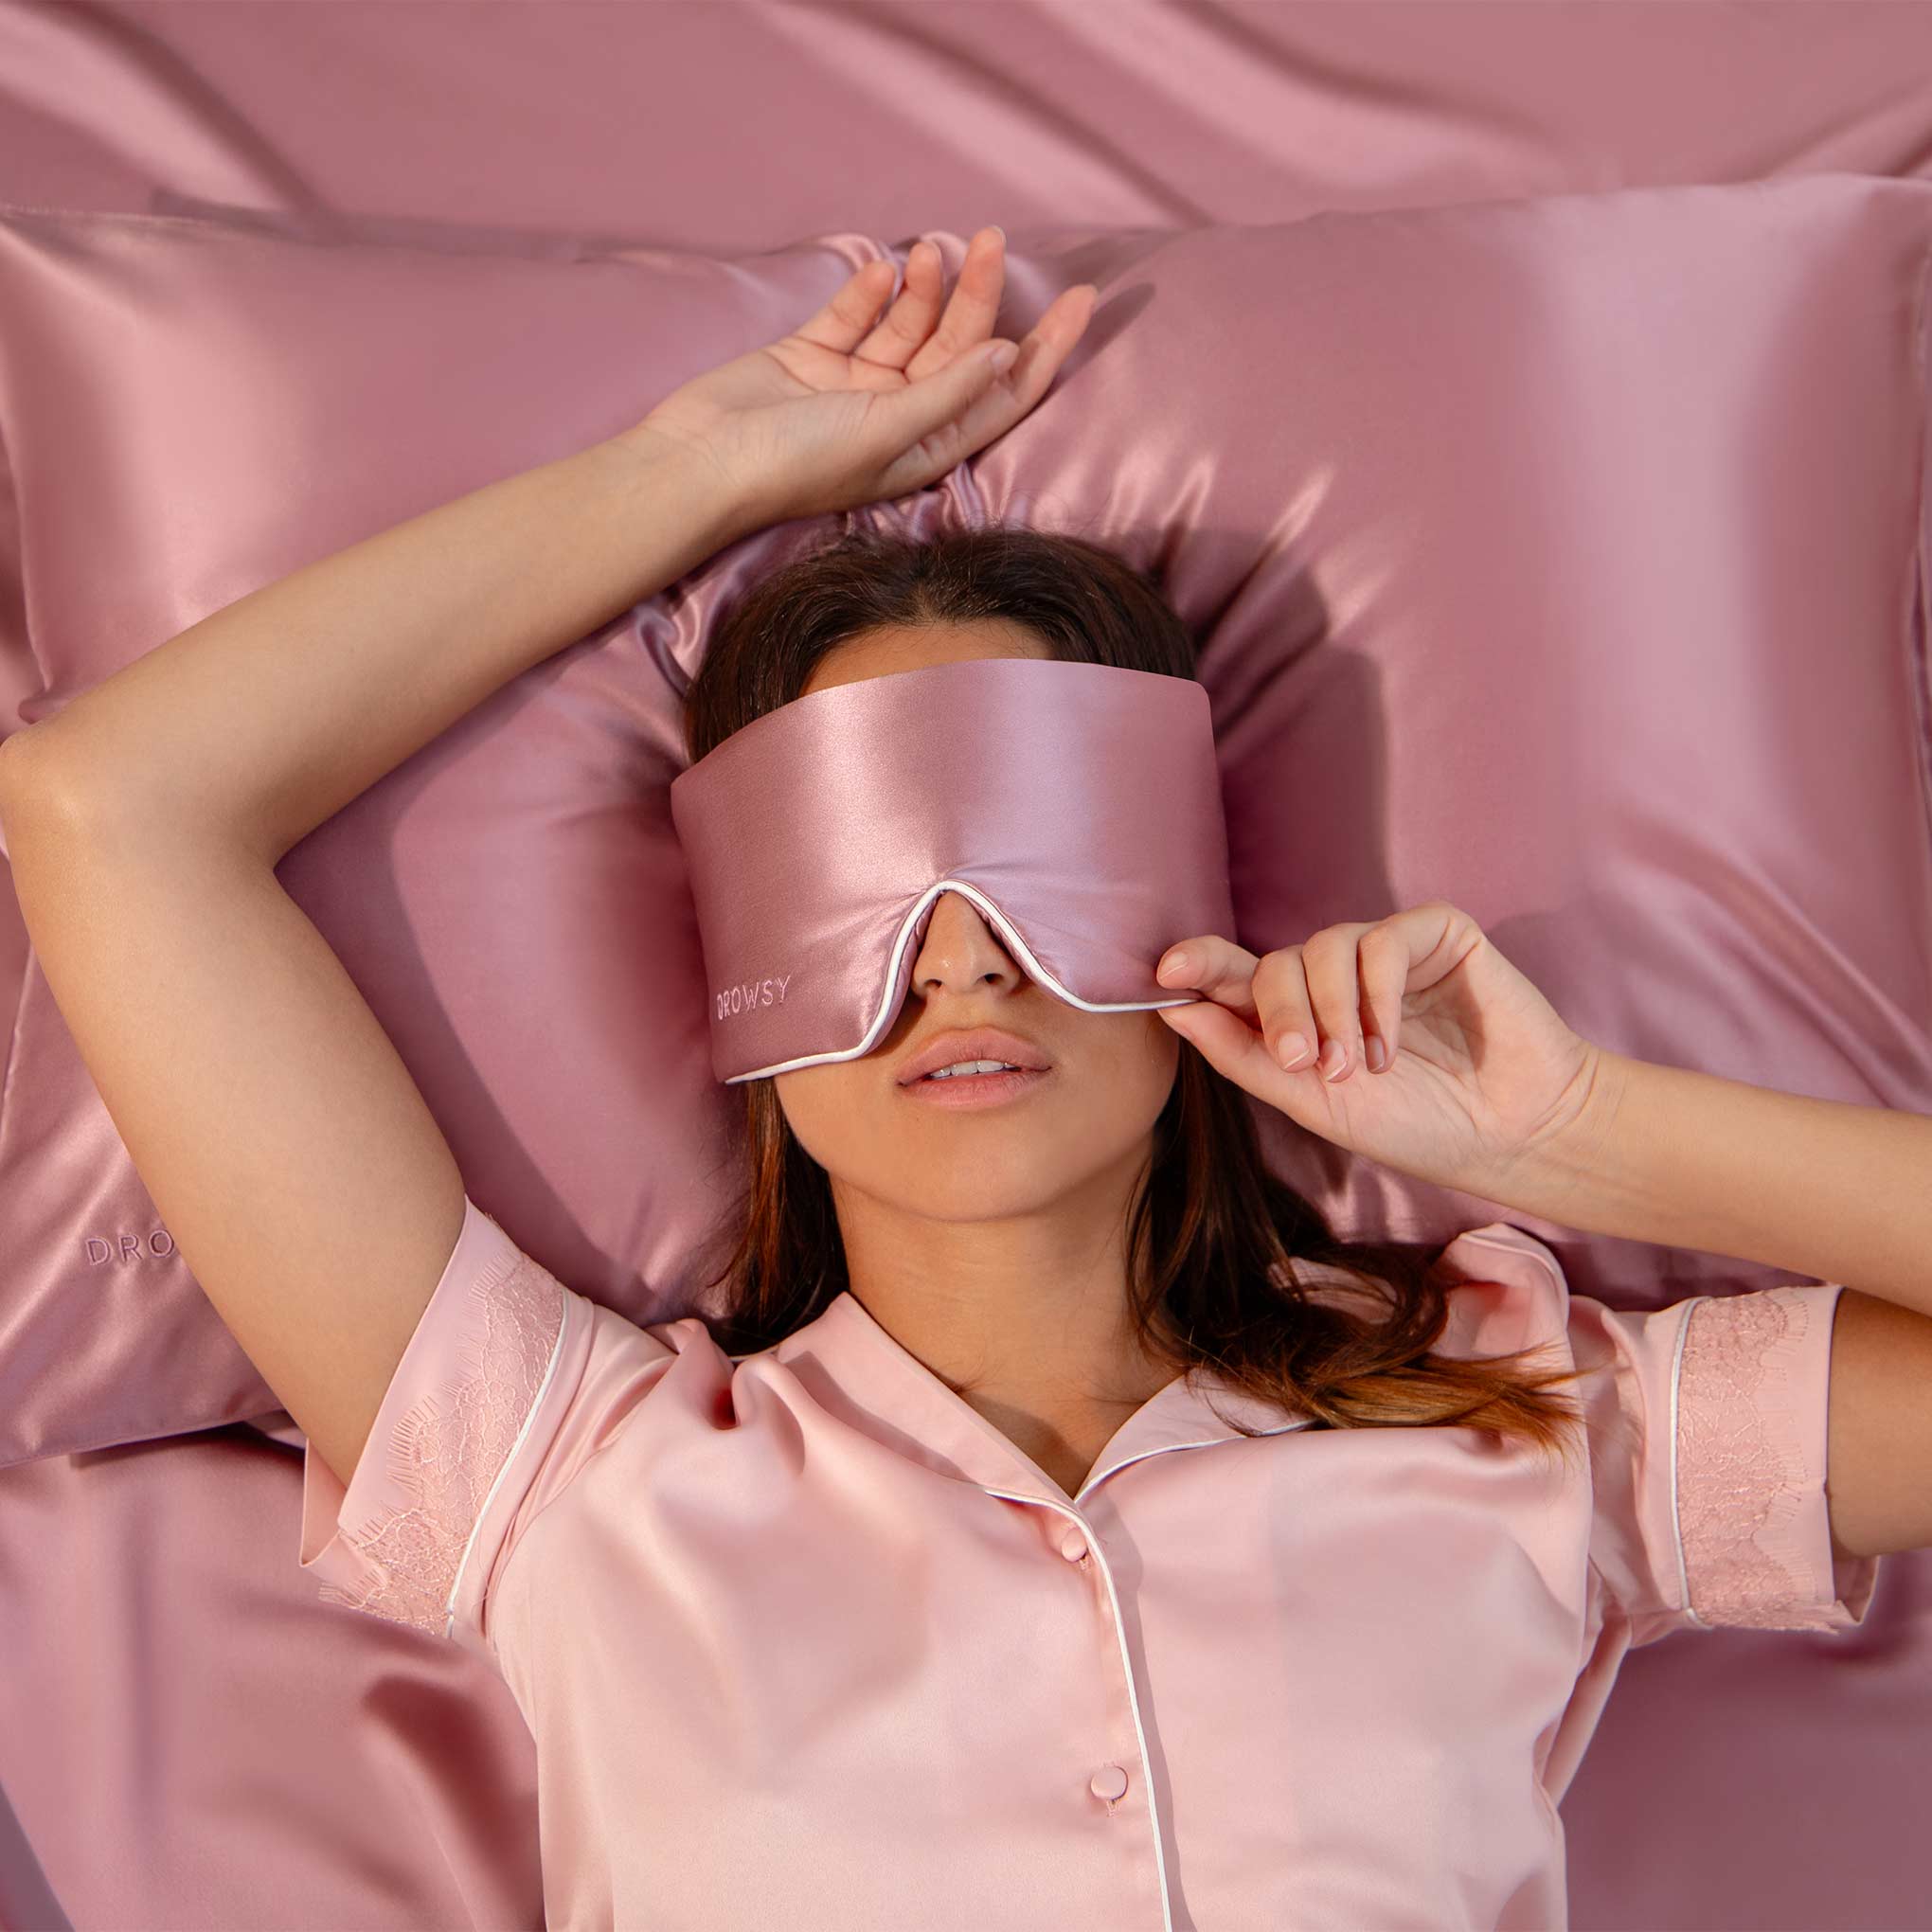 Model sleeping on pink Drowsy silk pillowcase with pink Drowsy silk sleep mask covering her eyes